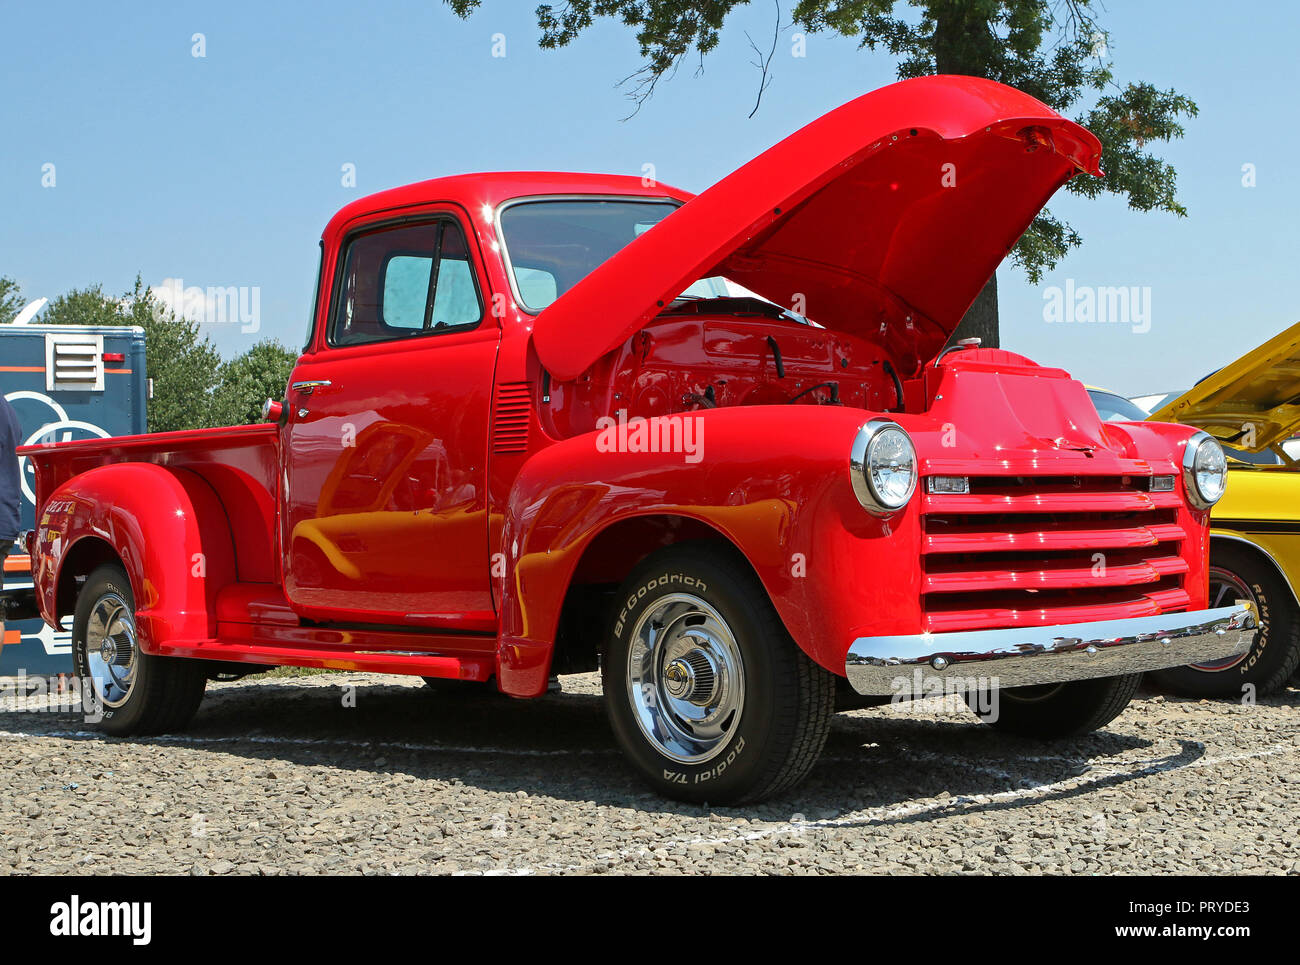 Classic Vintage Red Pickup Truck Stock Photo